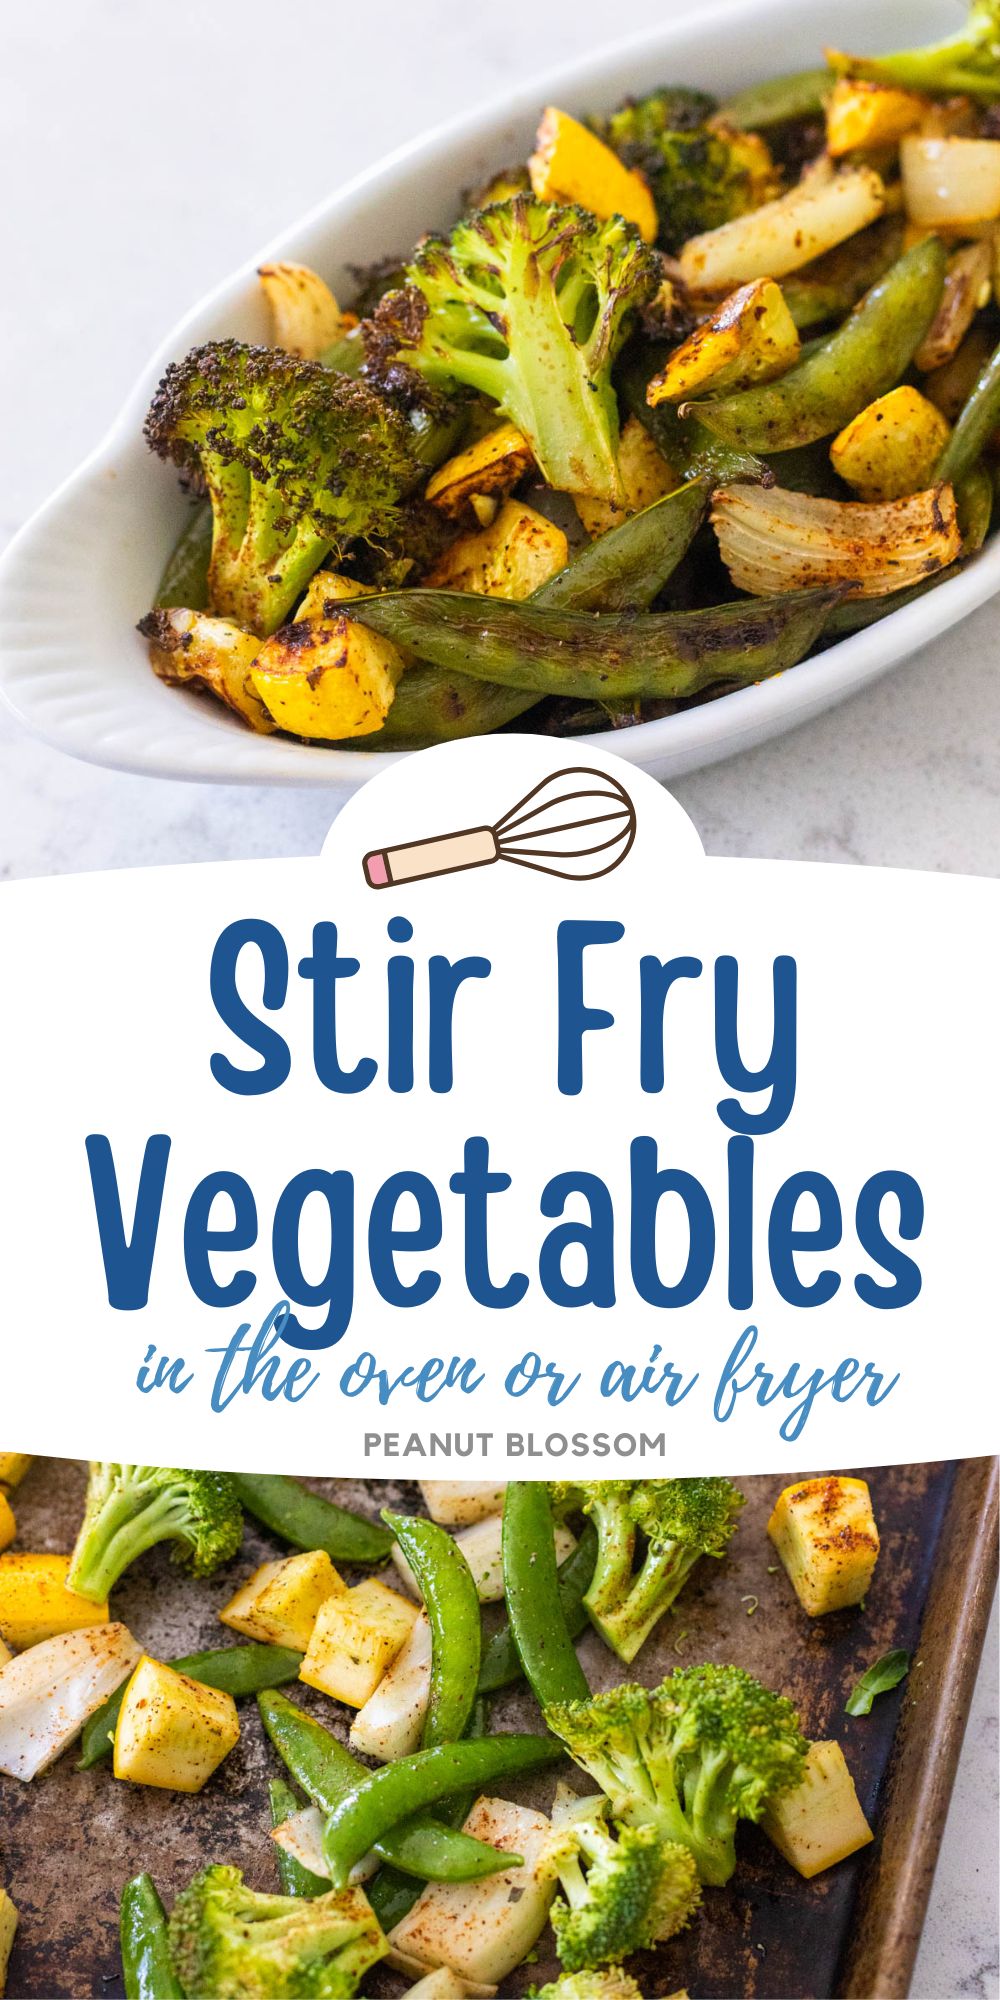 Stir Fry Vegetables in the Oven or Air Fryer - Peanut Blossom